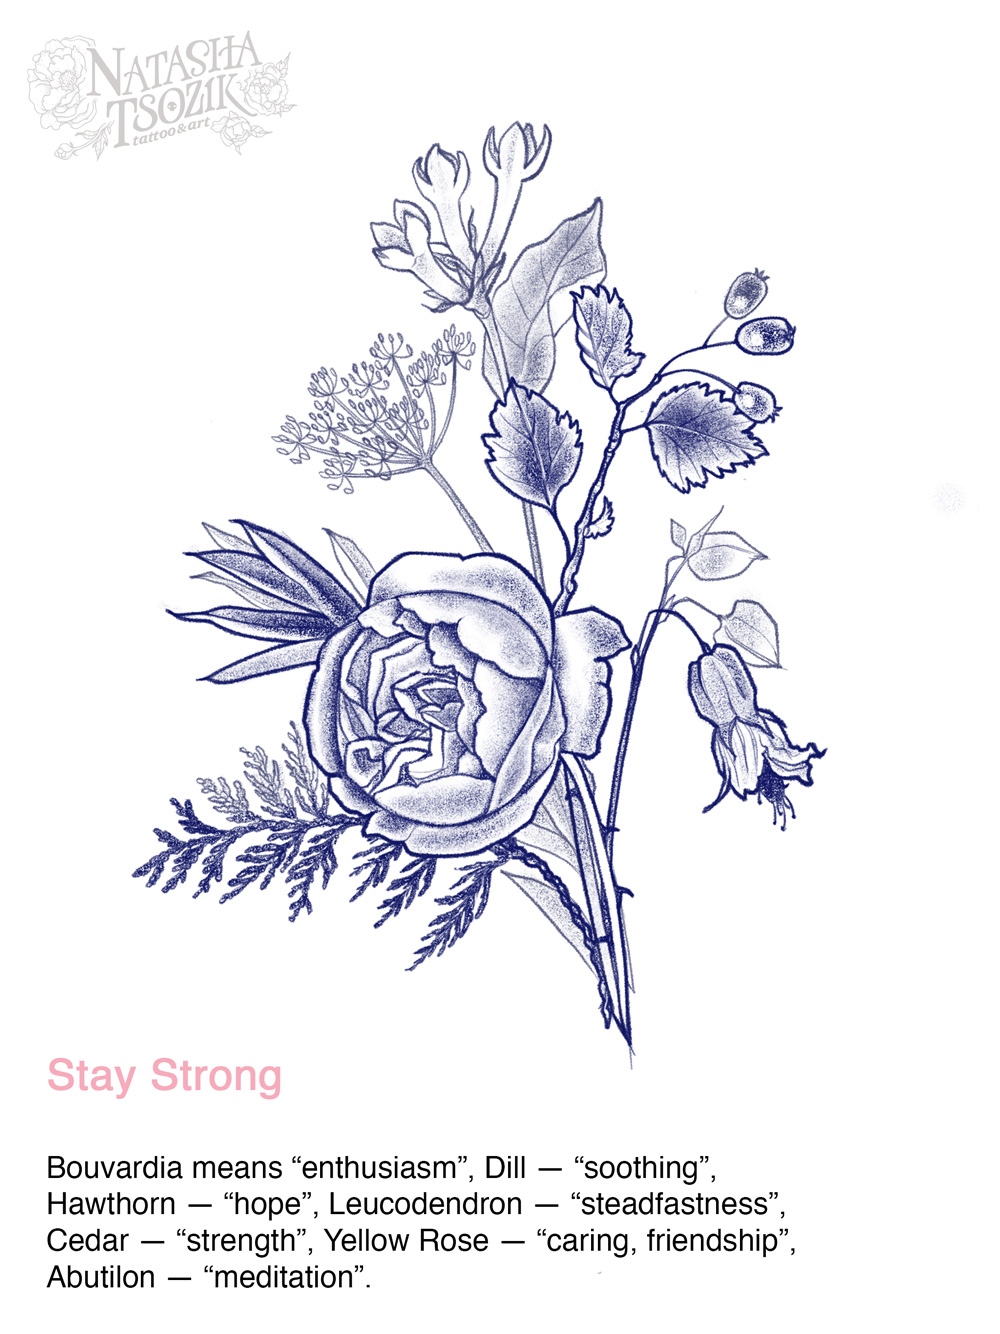 Stay-strong